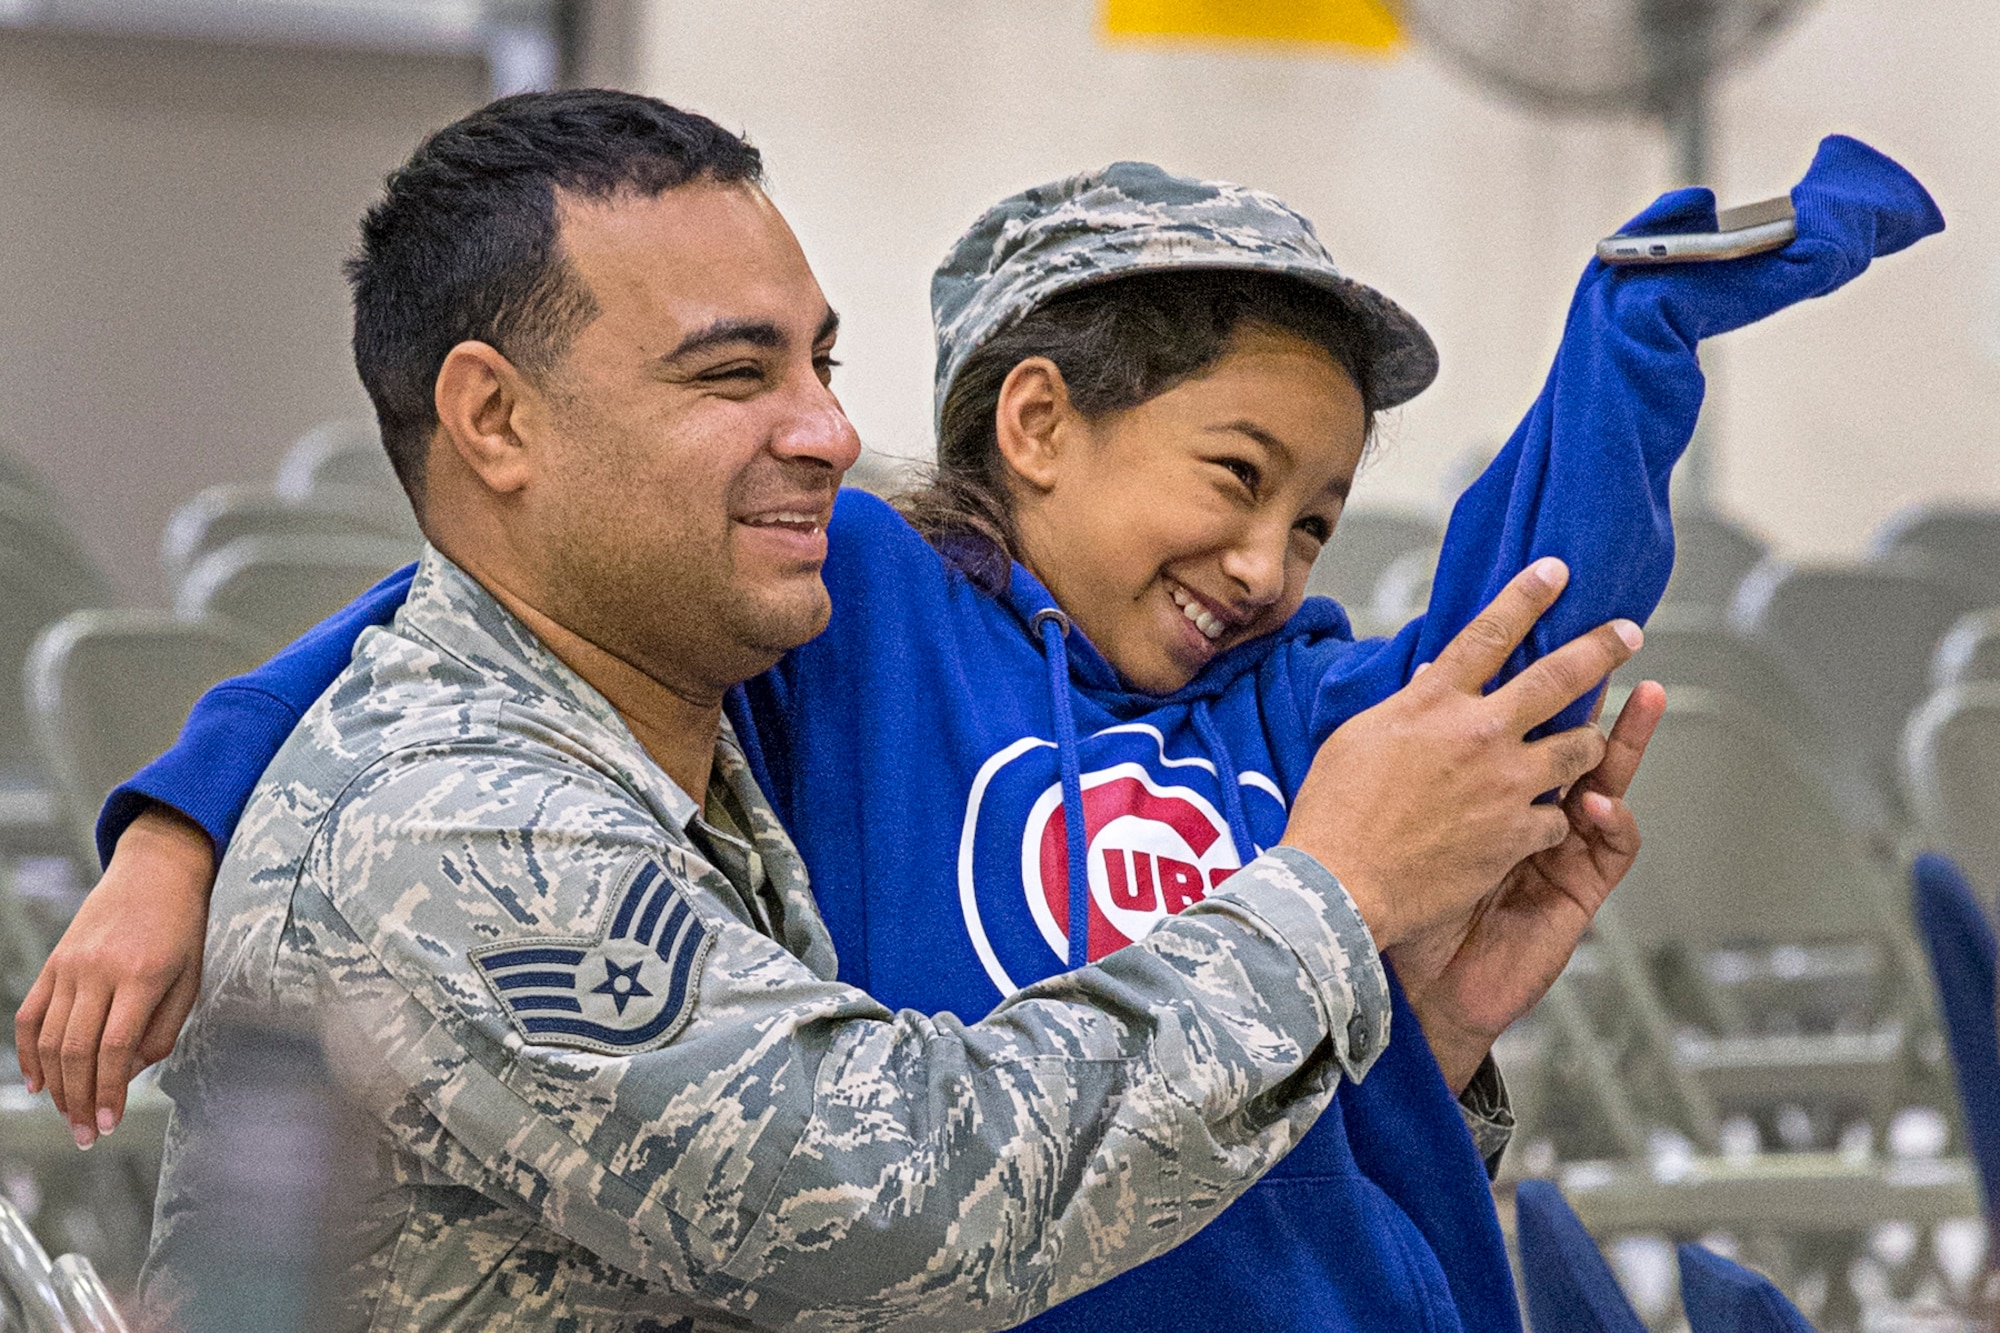 Staff Sgt. Luis Castillo, 434th Maintenance Squadron, shares laughs with his daughter Isabella Oct. 6, 2019 during the Grissom Fall Festival at Grissom Air Reserve Base, Indiana. The festival gave unit members and their families an opportunity to throttle back after a busy year of deployments, exercises, inspections and an airshow. (U.S. Air Force photo/Douglas Hays)